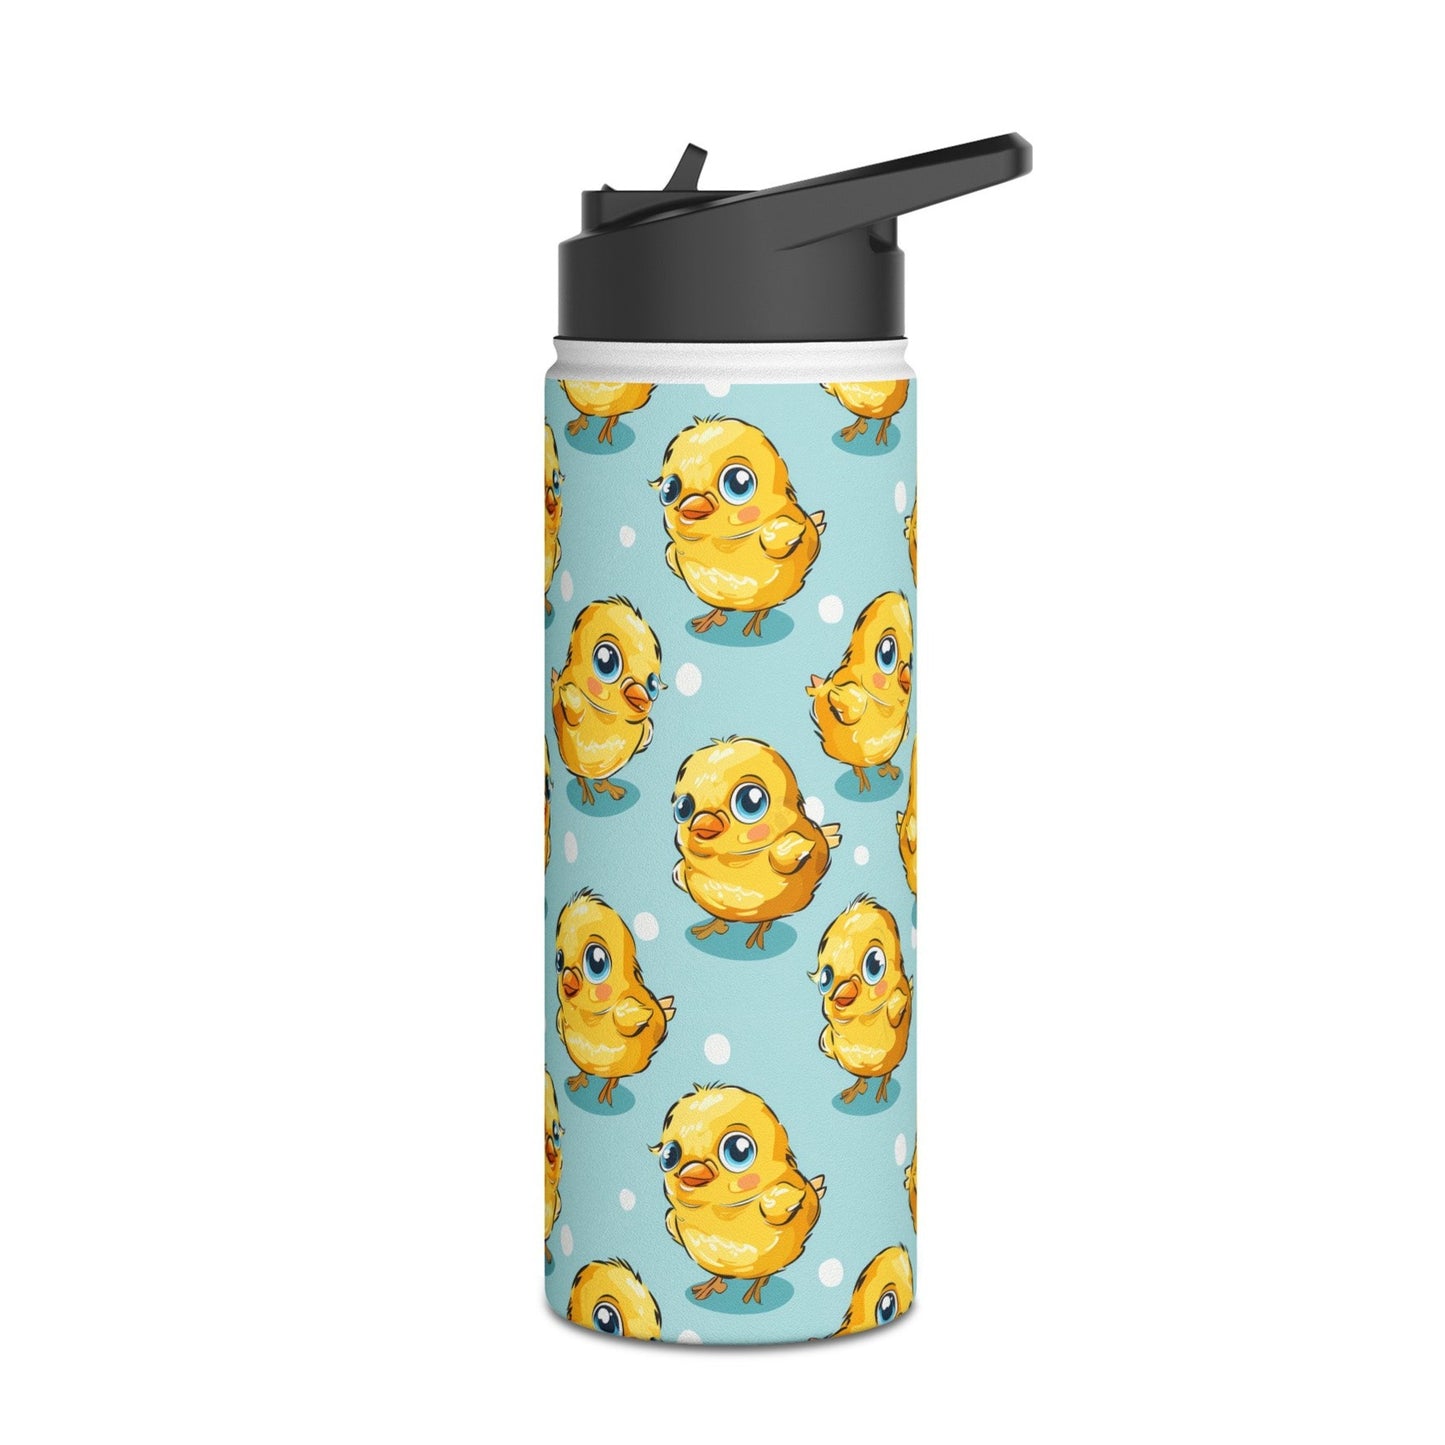 Insulated Water Bottle Thermos, 18oz, Cute Baby Chicks - Double Walled Stainless Steel, Keeps Drinks Hot or Cold